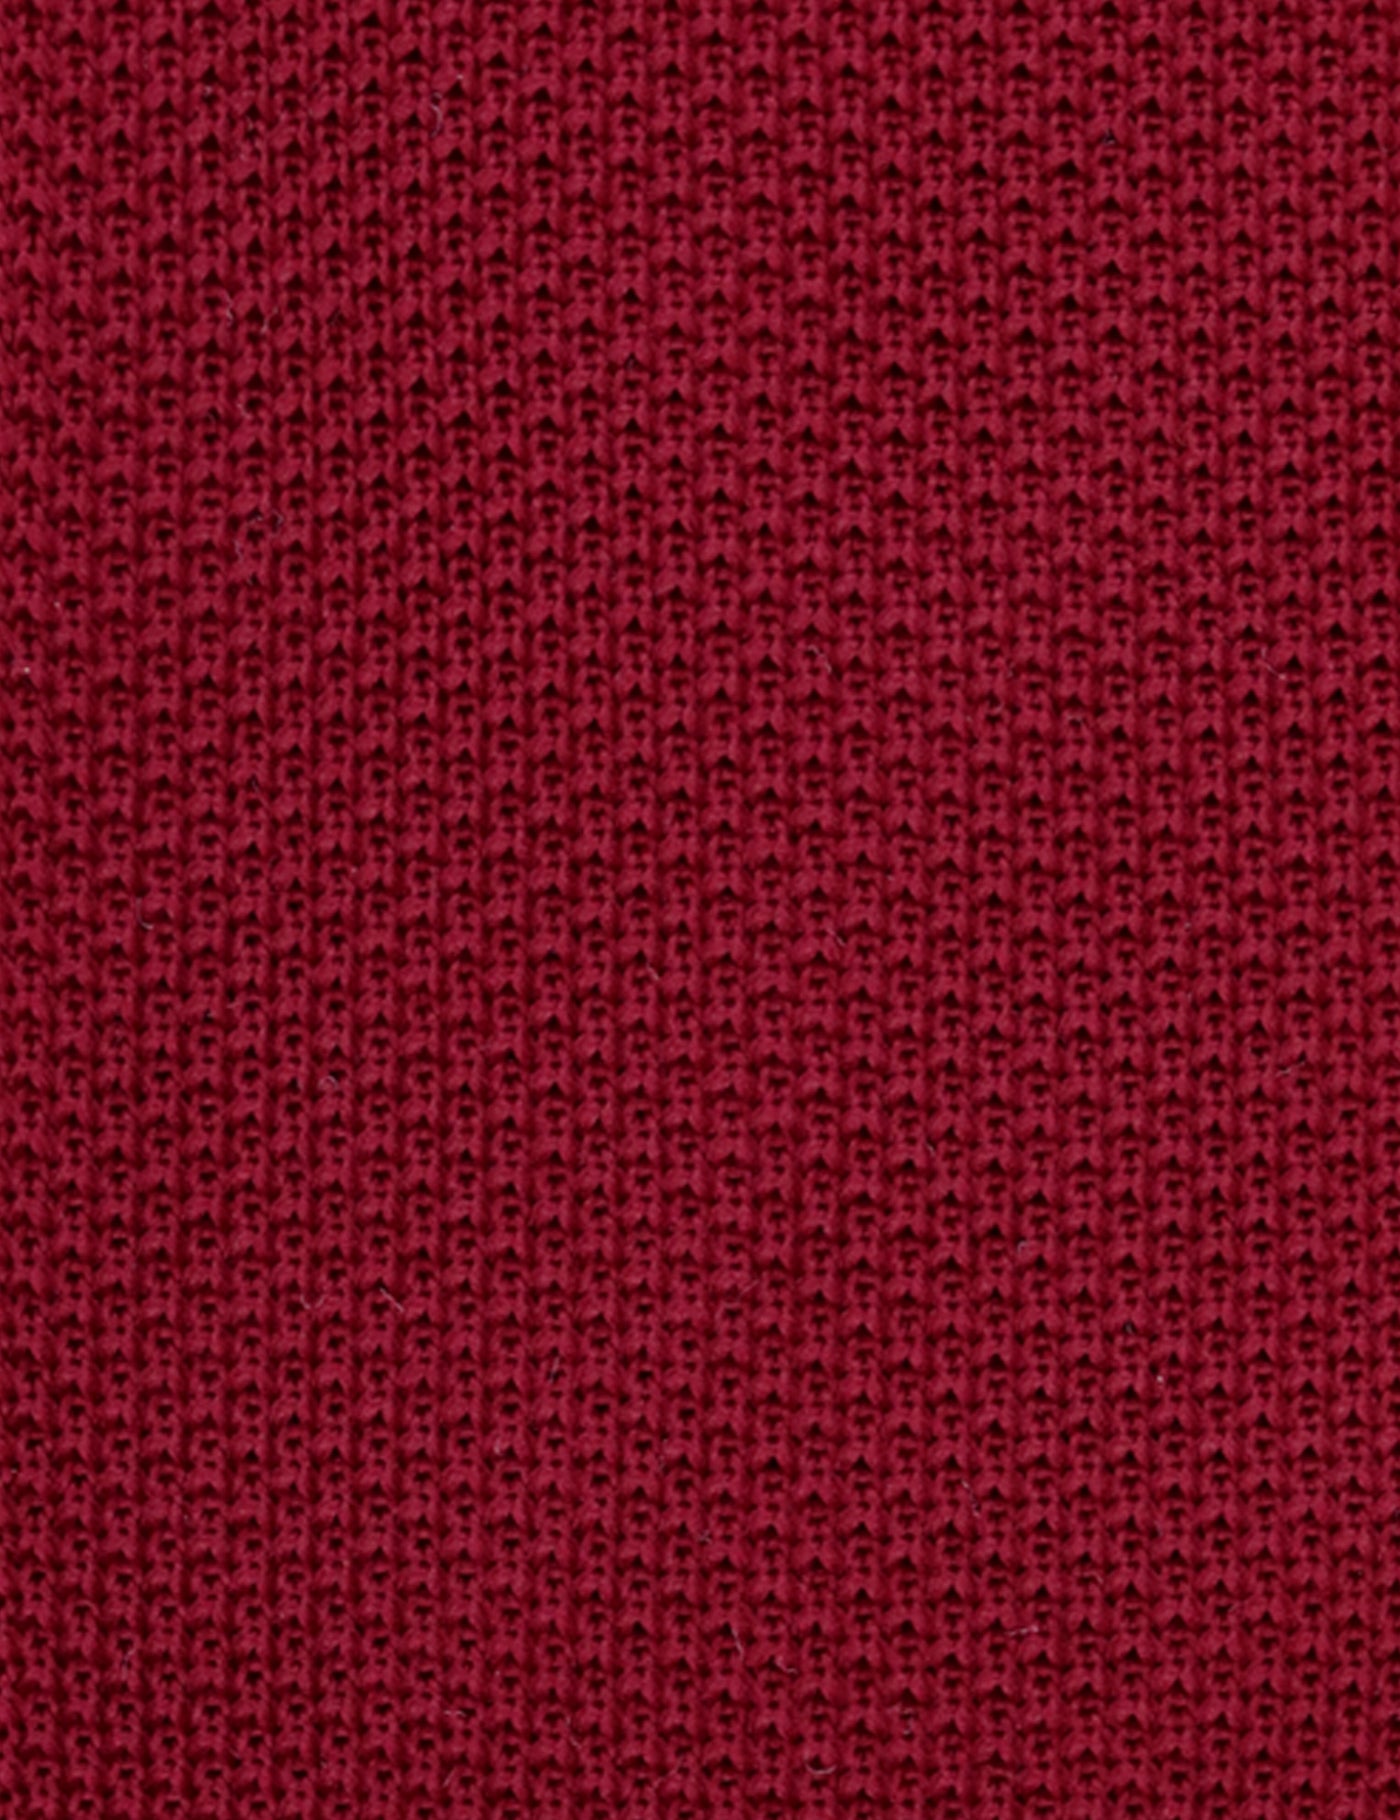 100% Polyester Knitted Pocket Square - Red